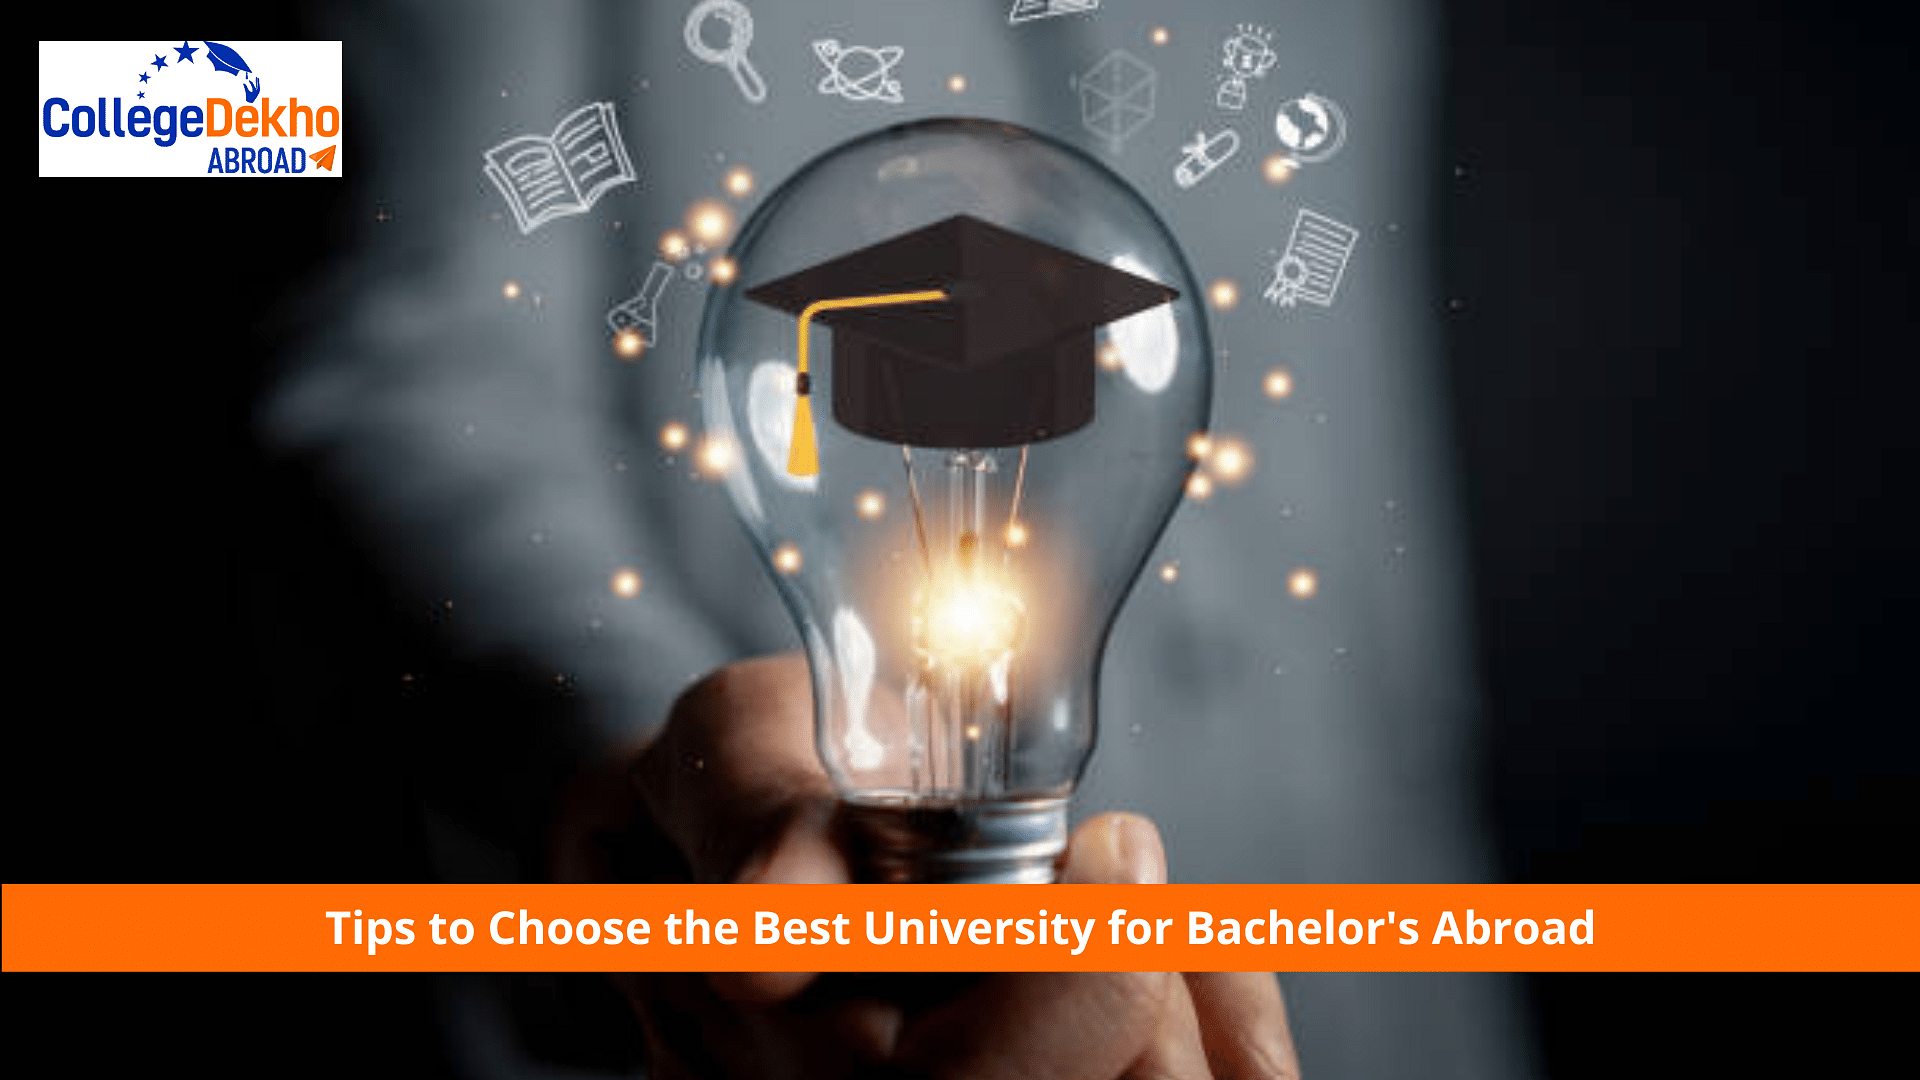 Tips to Choose the Best University for Bachelor's Abroad